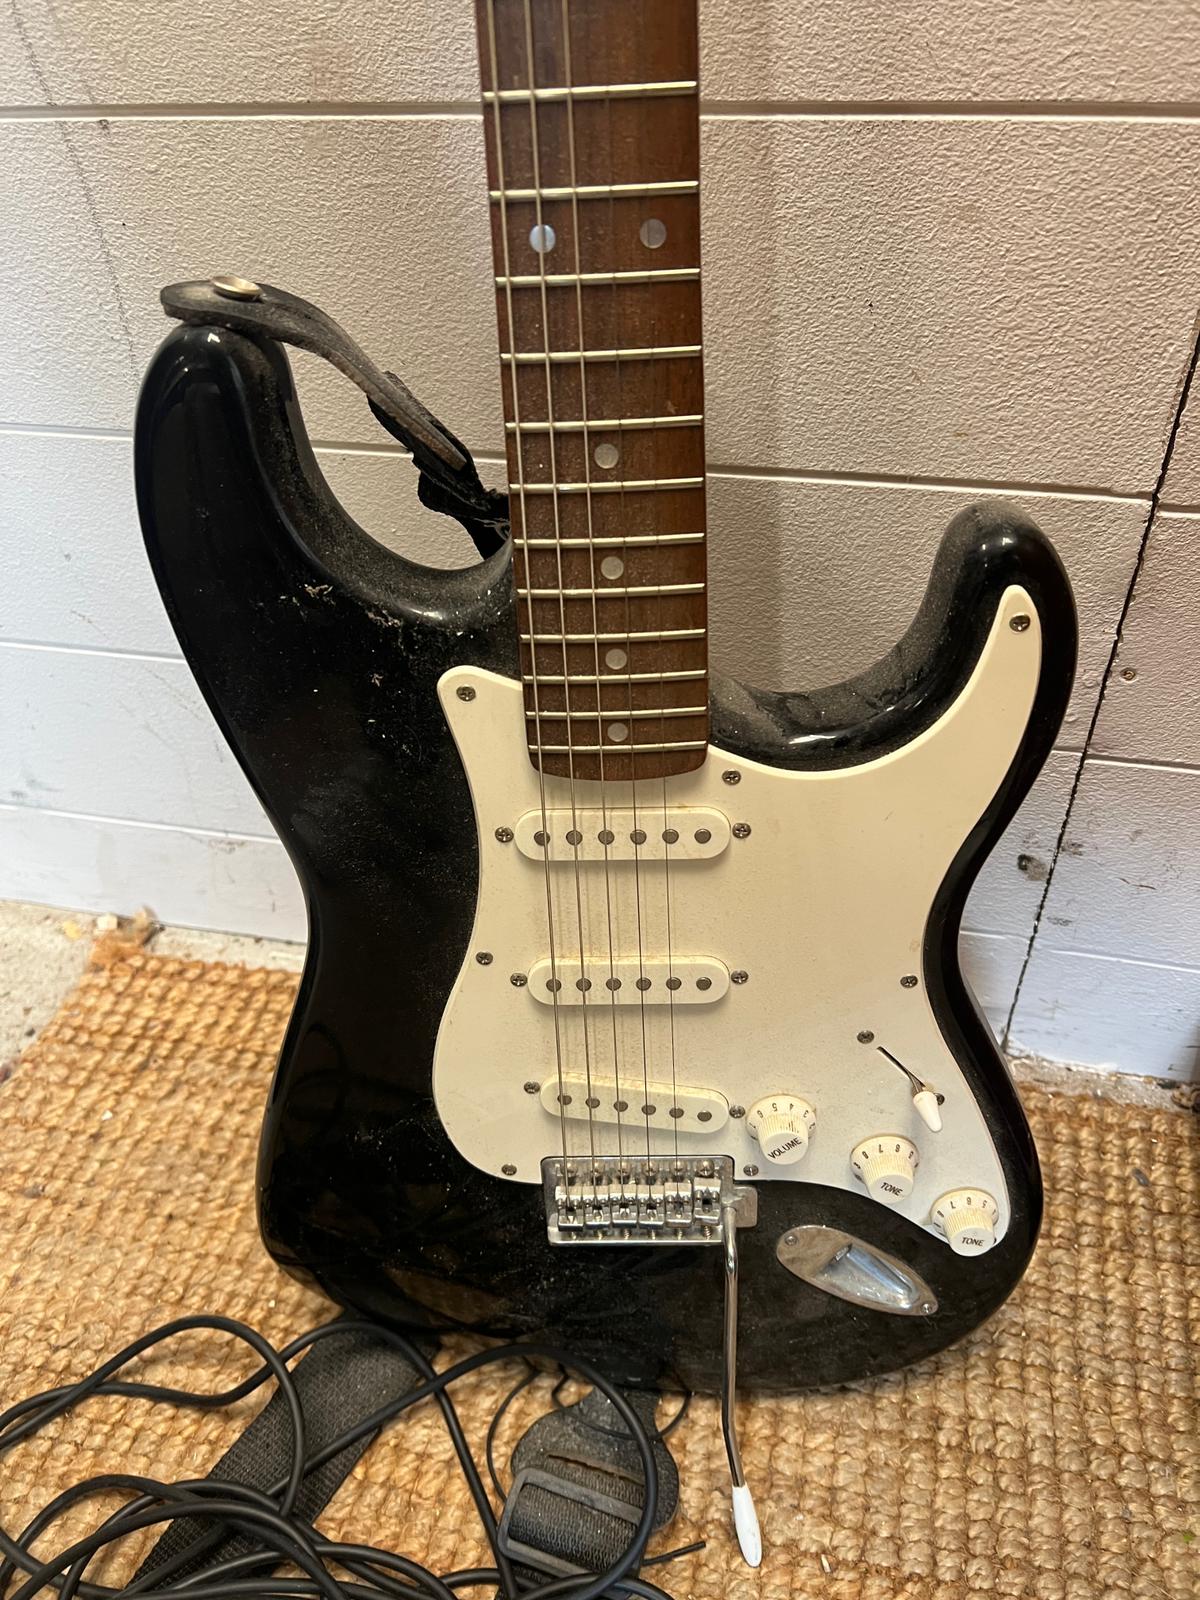 A Squier Strat electric guitar, Affinity series - Image 3 of 4